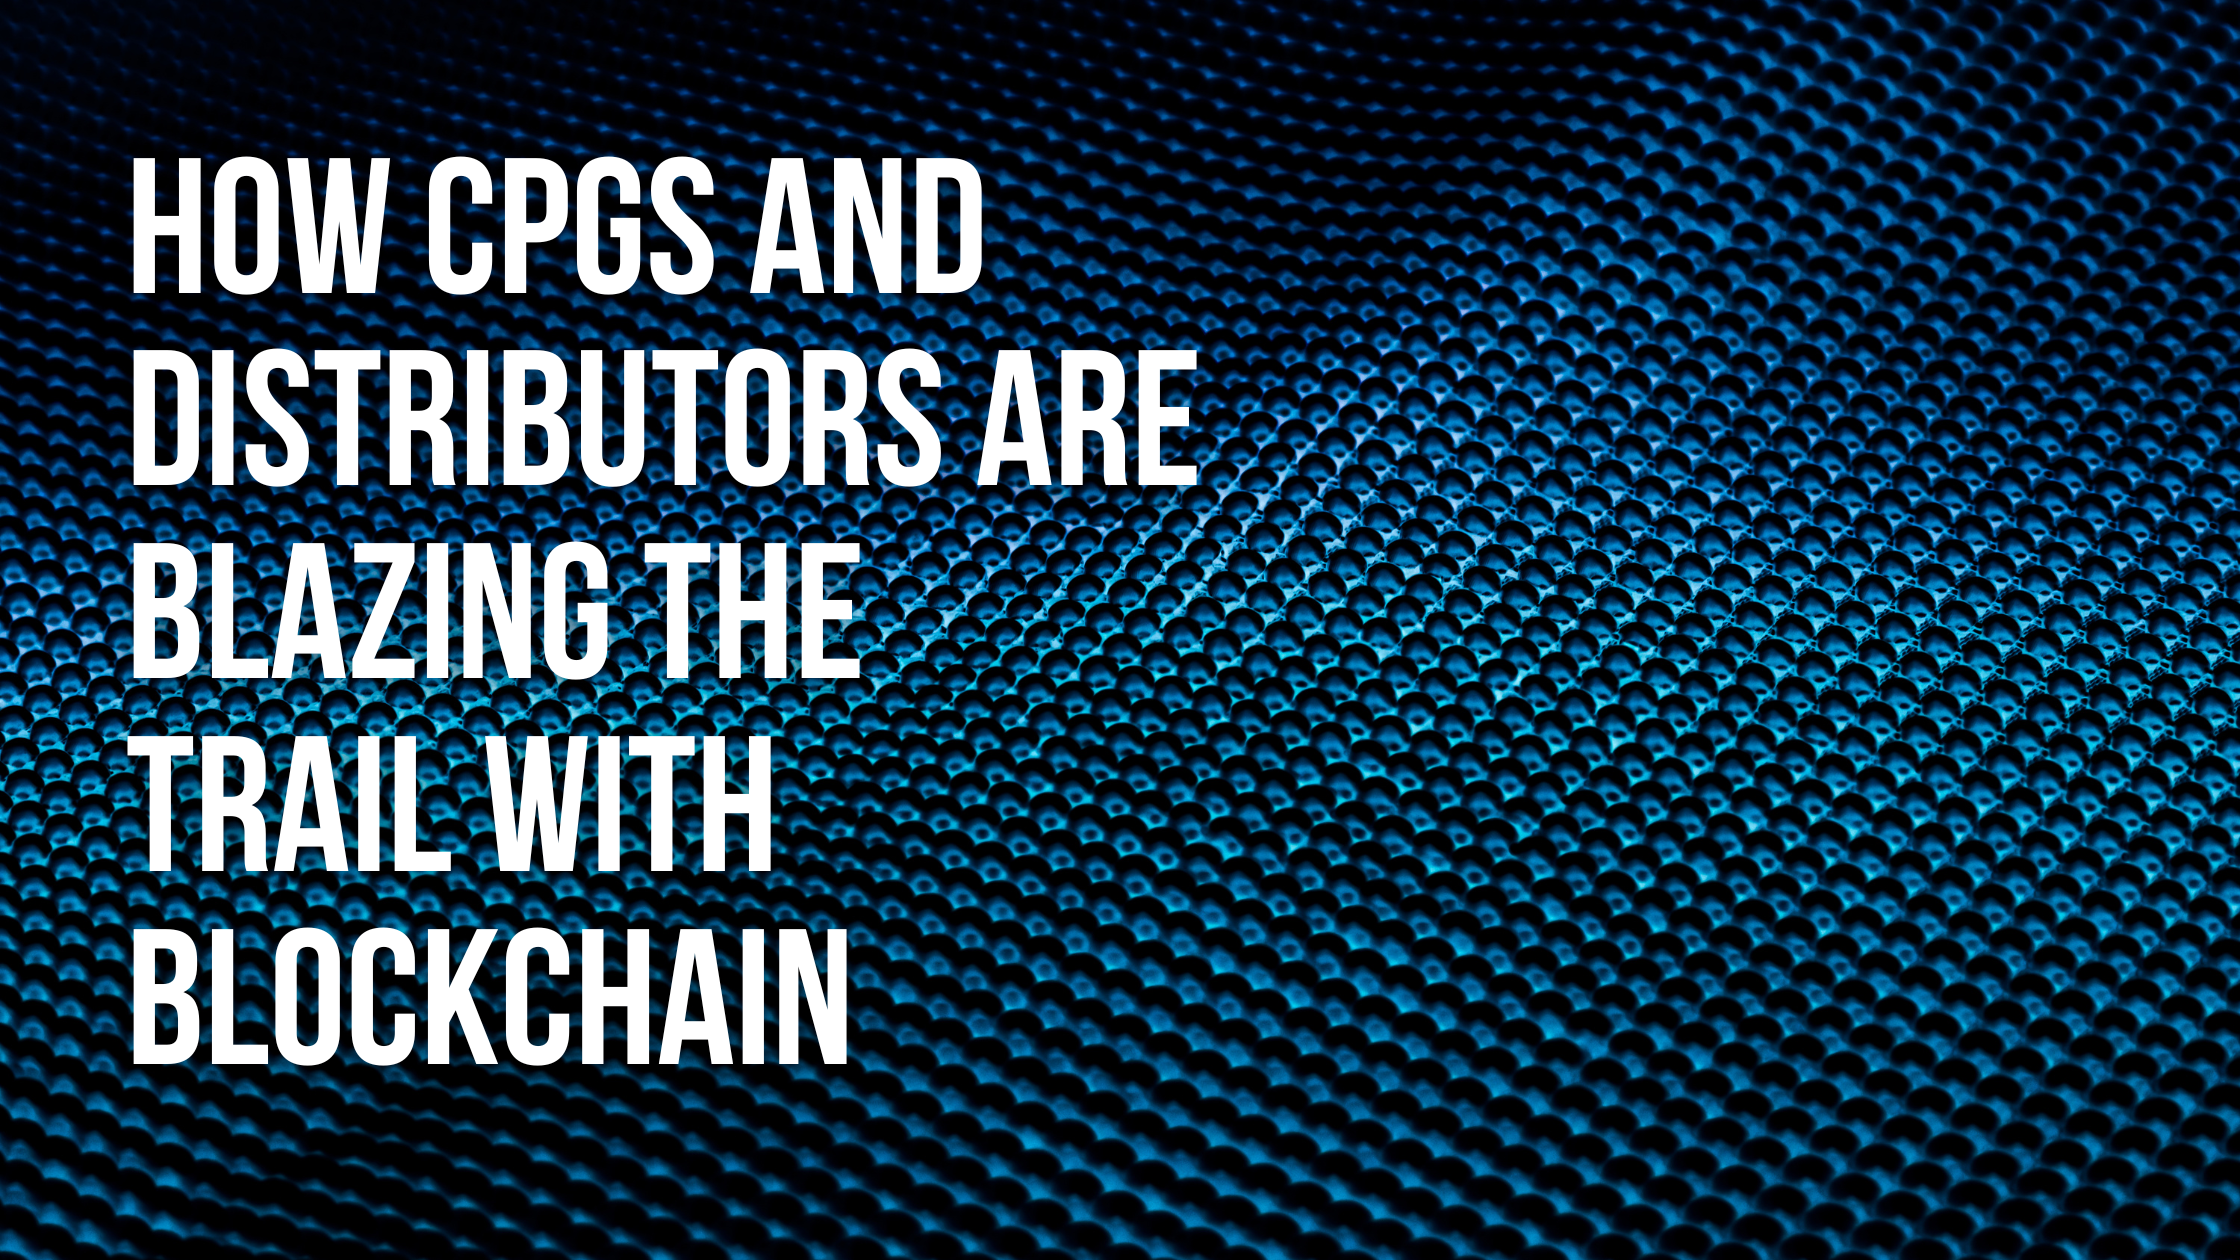 How CPGs and Distributors are Blazing the Trail With Blockchain